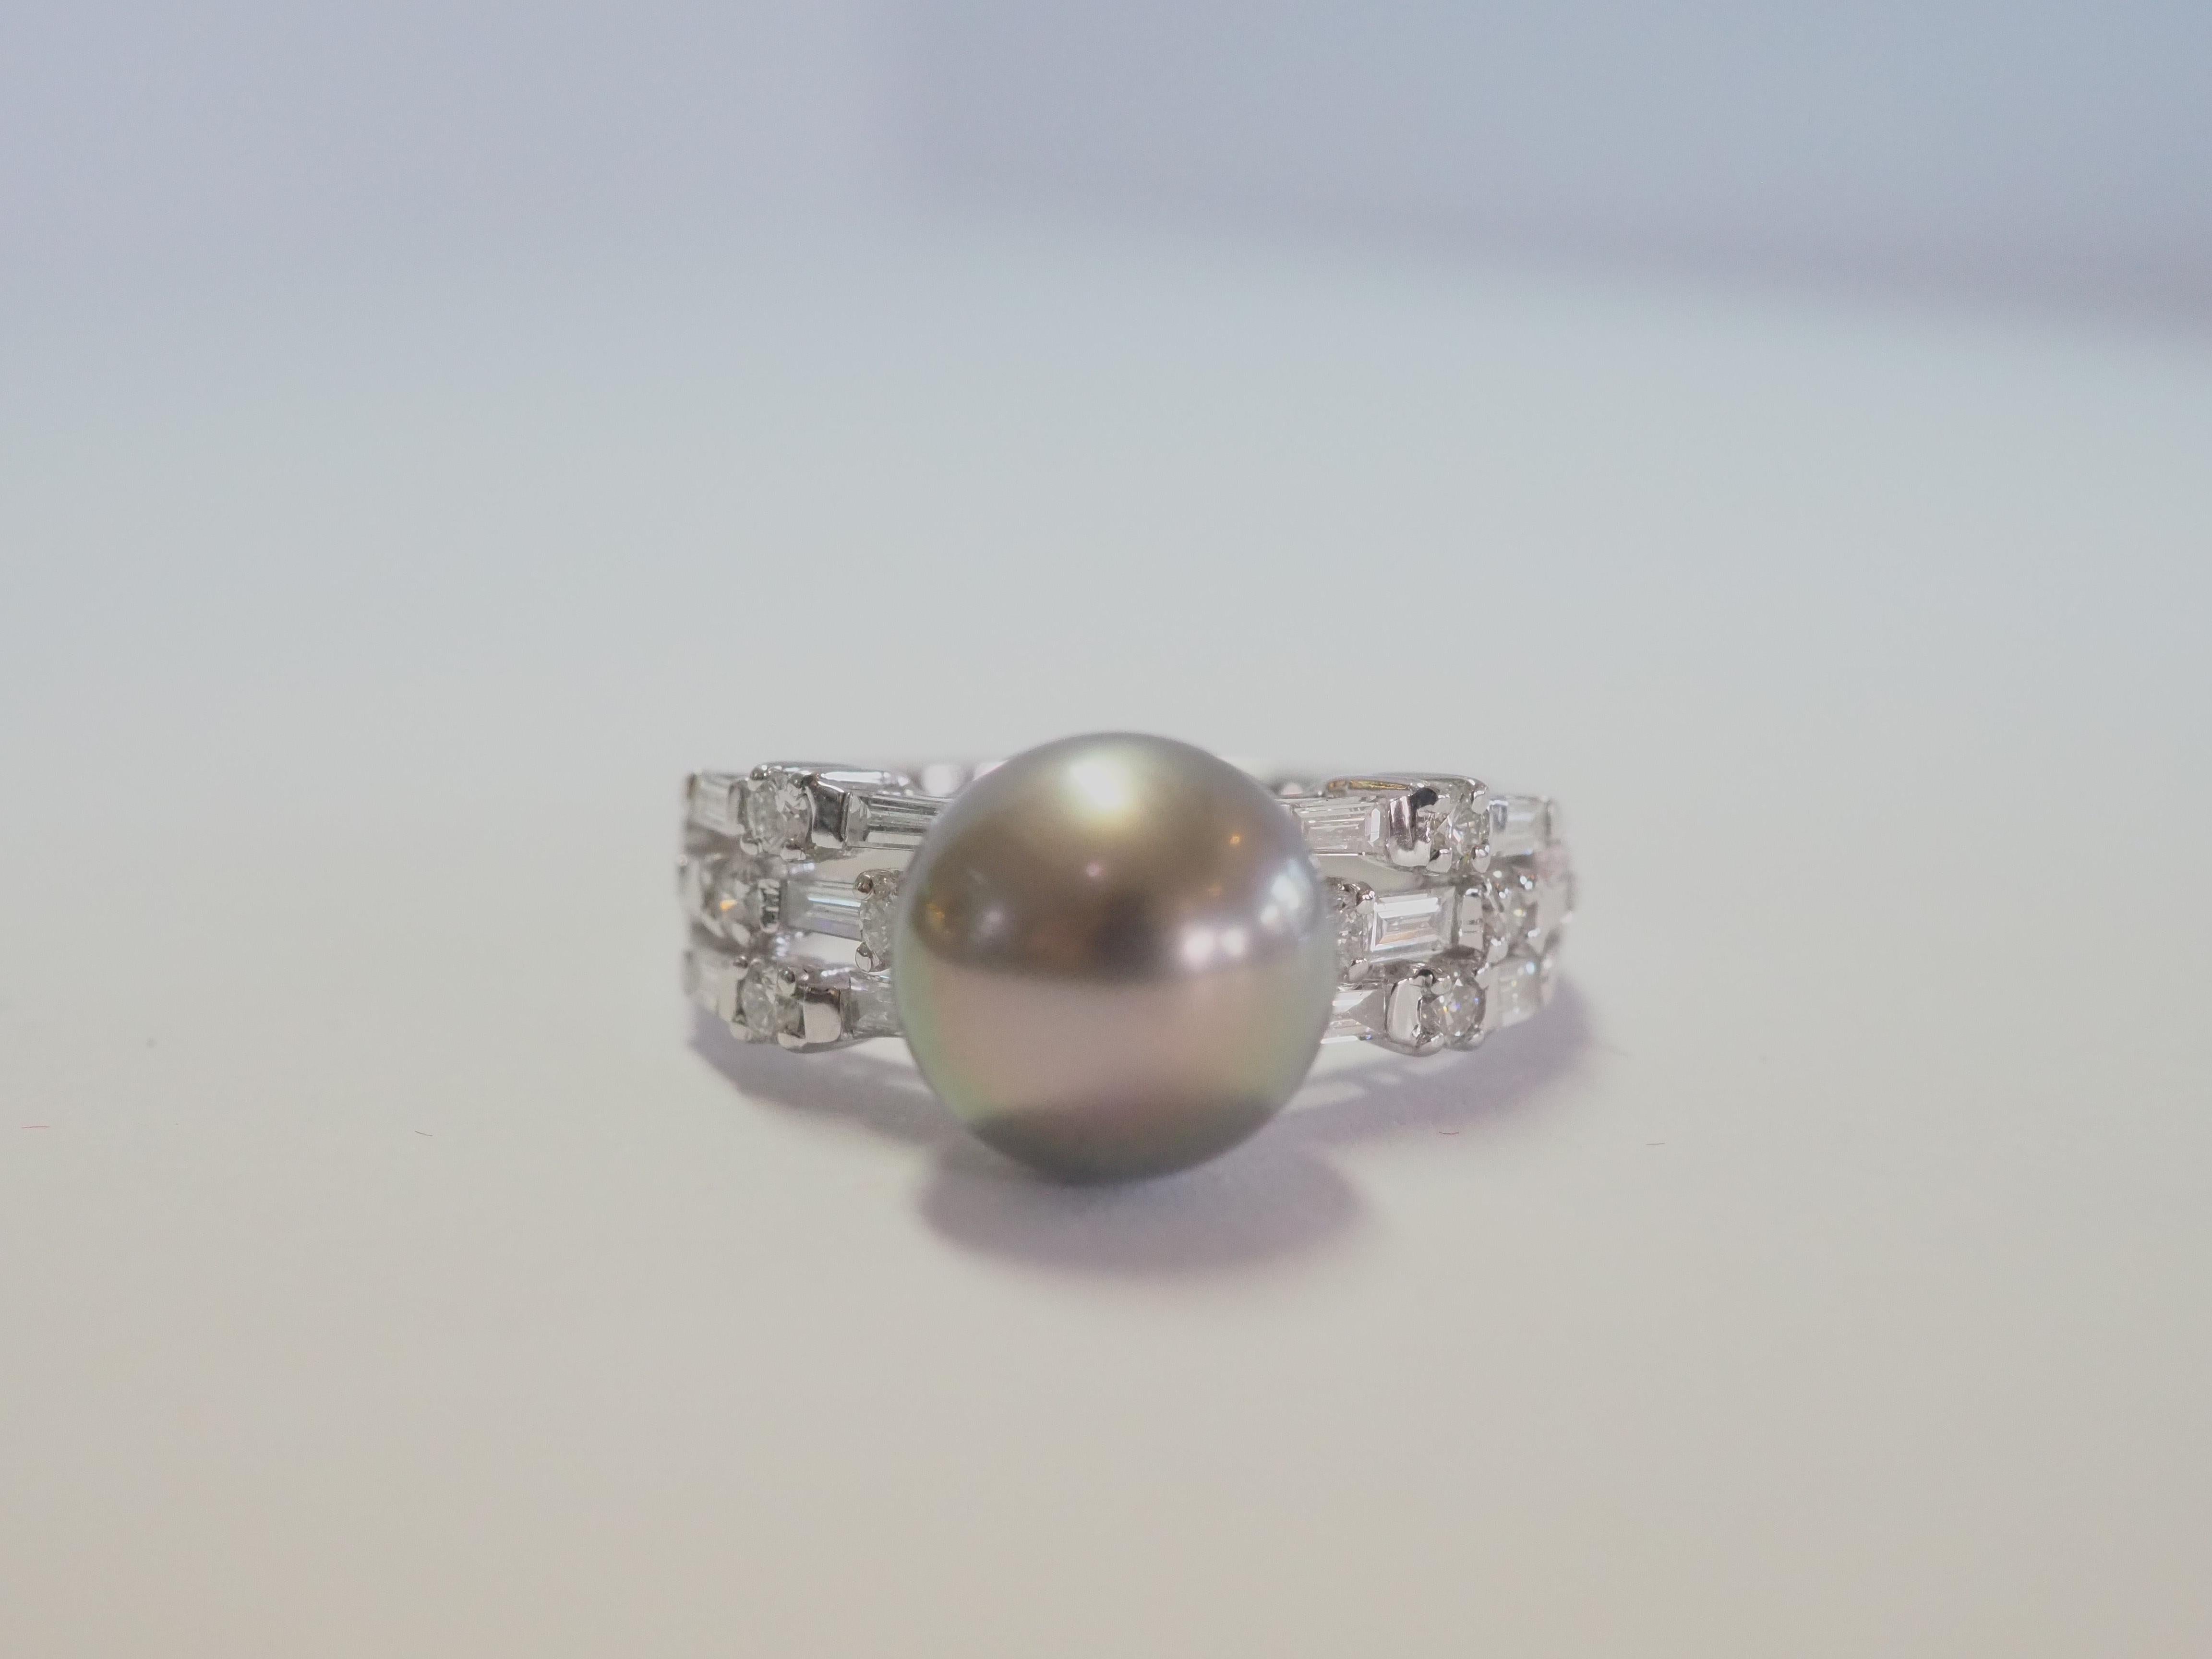 This brilliant 18k white gold ring is adorned with a rare and beautiful brownish green Tahiti pearl! The pearl is perfectly rounded and has little 1 or 2 blemishes or natural marks. The diameter of the pearl is 9mm. There are 12 baguette diamonds